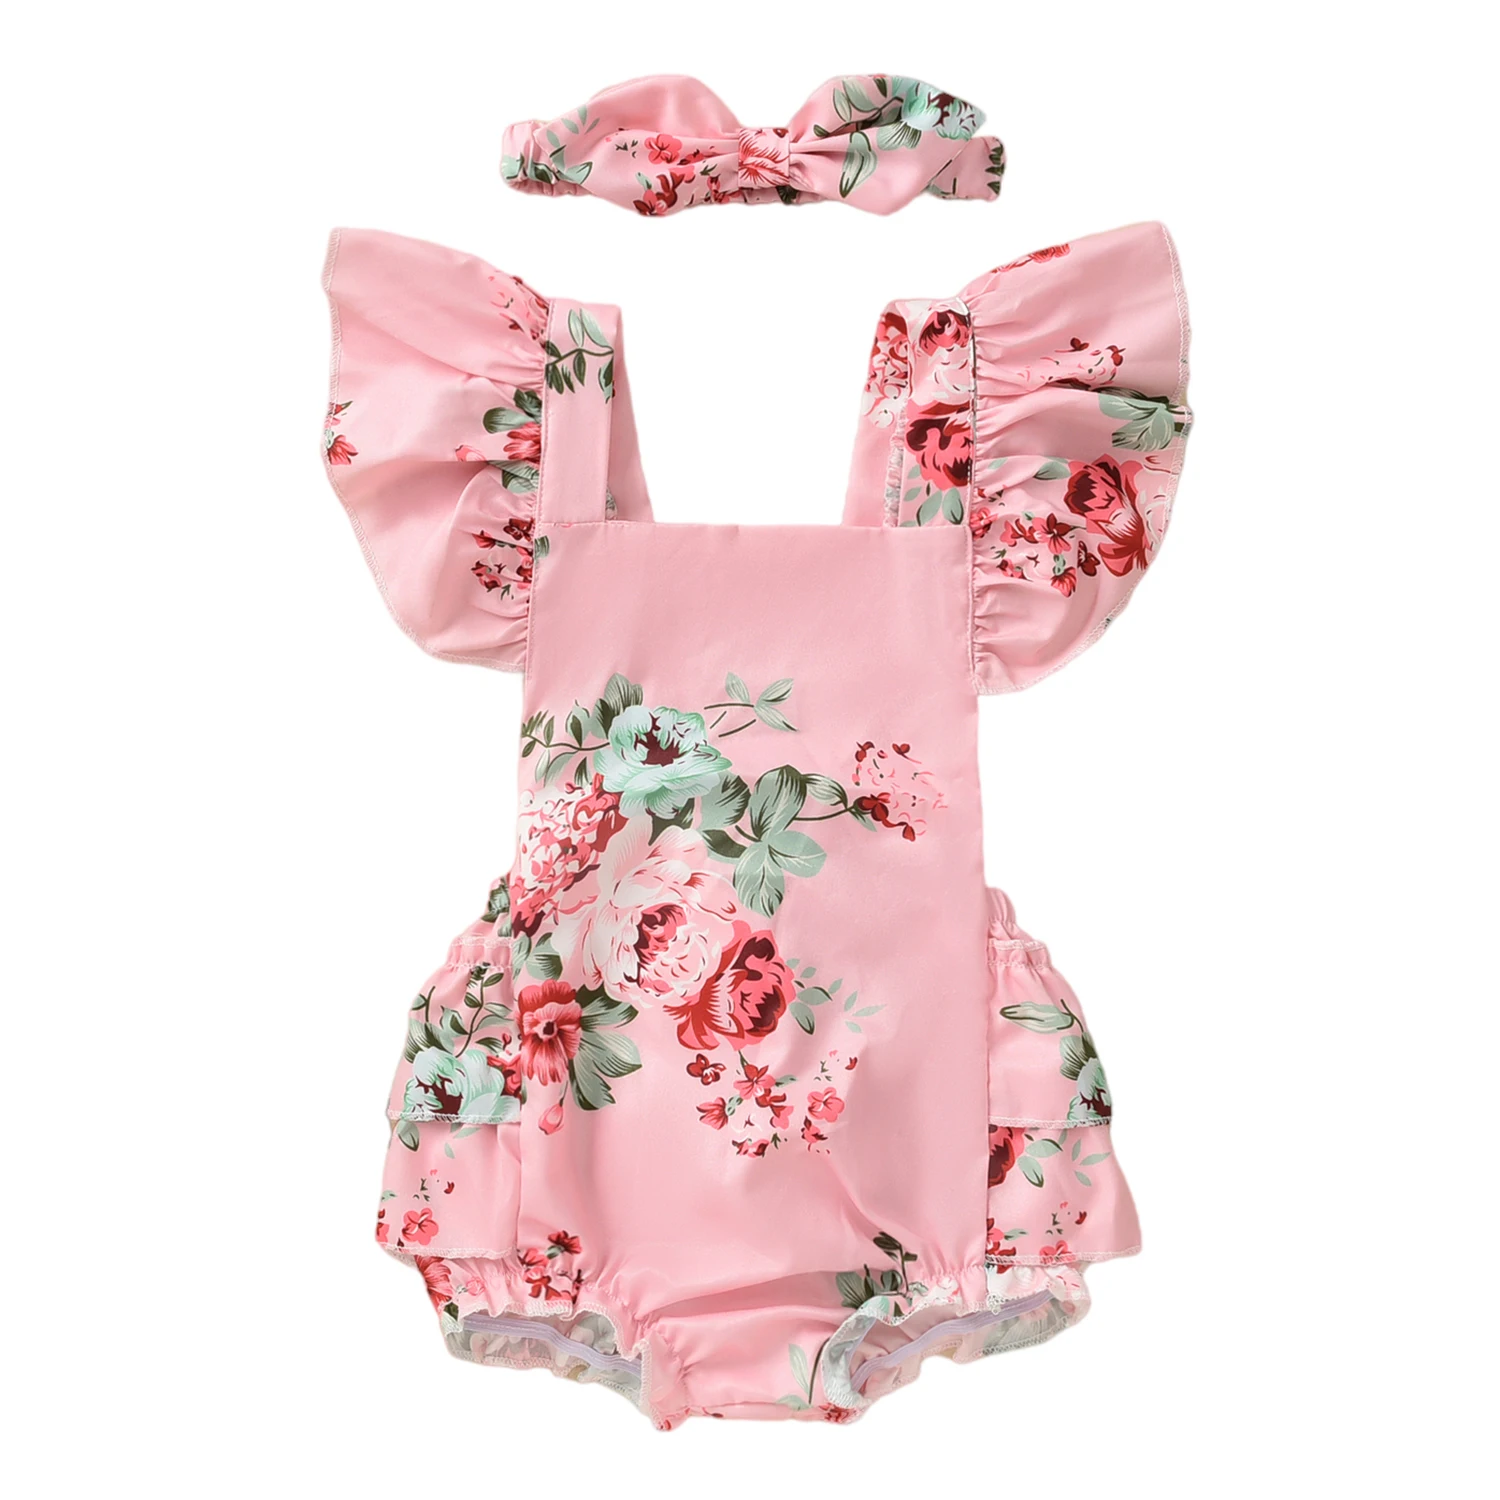 

OPPERIAYA 2Pc Newborn Flower Print Summer Outfit Baby Girl Tie-Up Ruffled Fly Sleeve Square Collar Bowknot Bodysuit Bow Headband